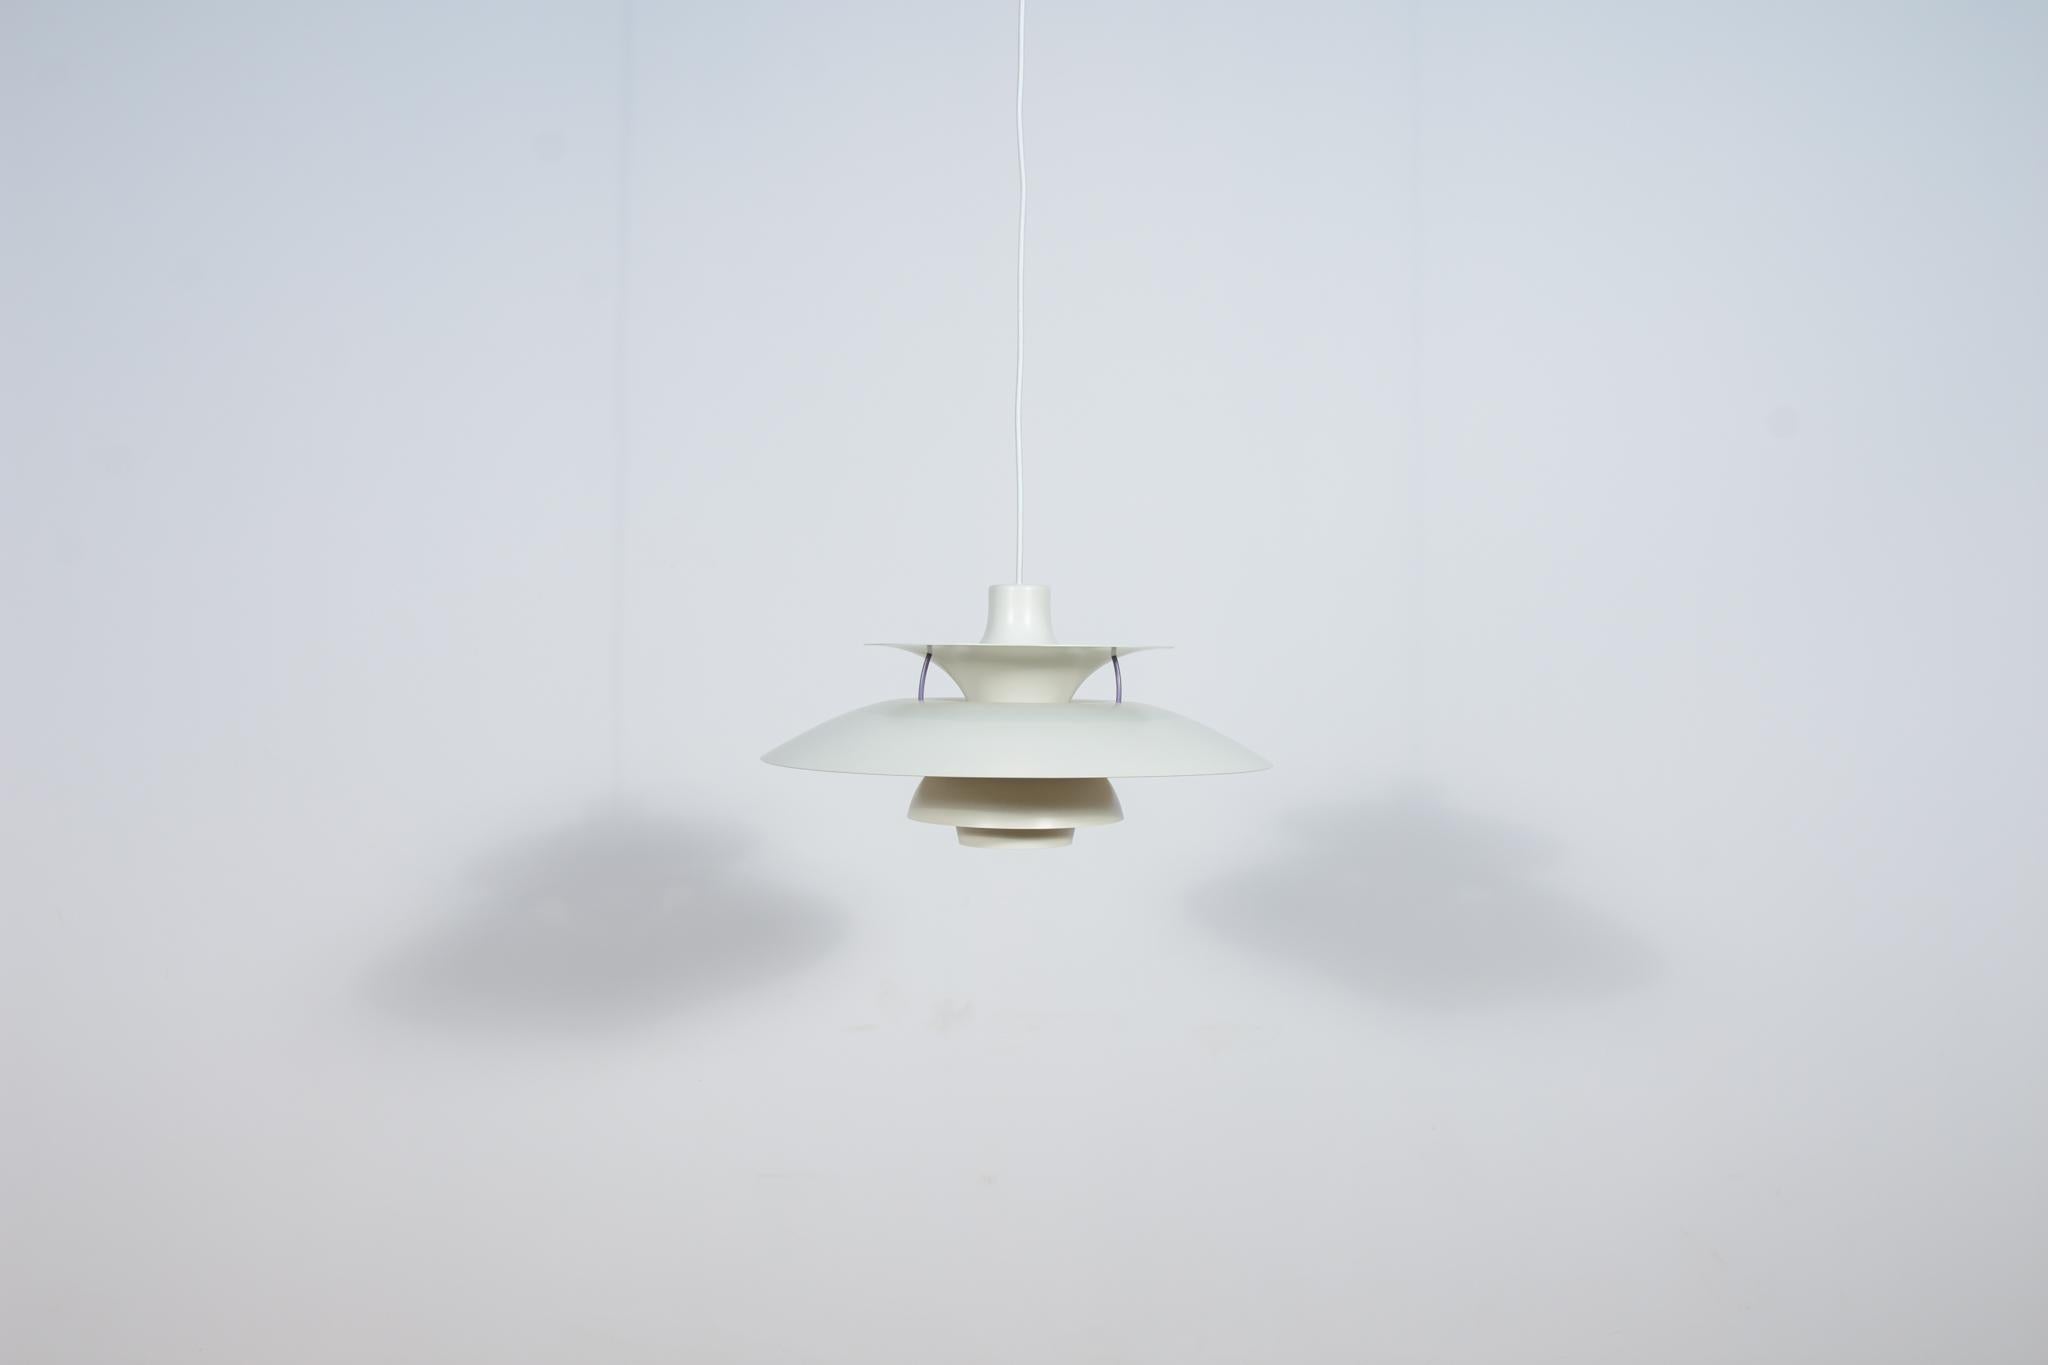 
This pendant was designed by Poul Henningsen and produced by Louis Poulsen from 1966 until it was discontinued in this color in the late 1970s to early 1980s. It is made of powder-coated aluminum and is lit both downwards and from the sides. The PH